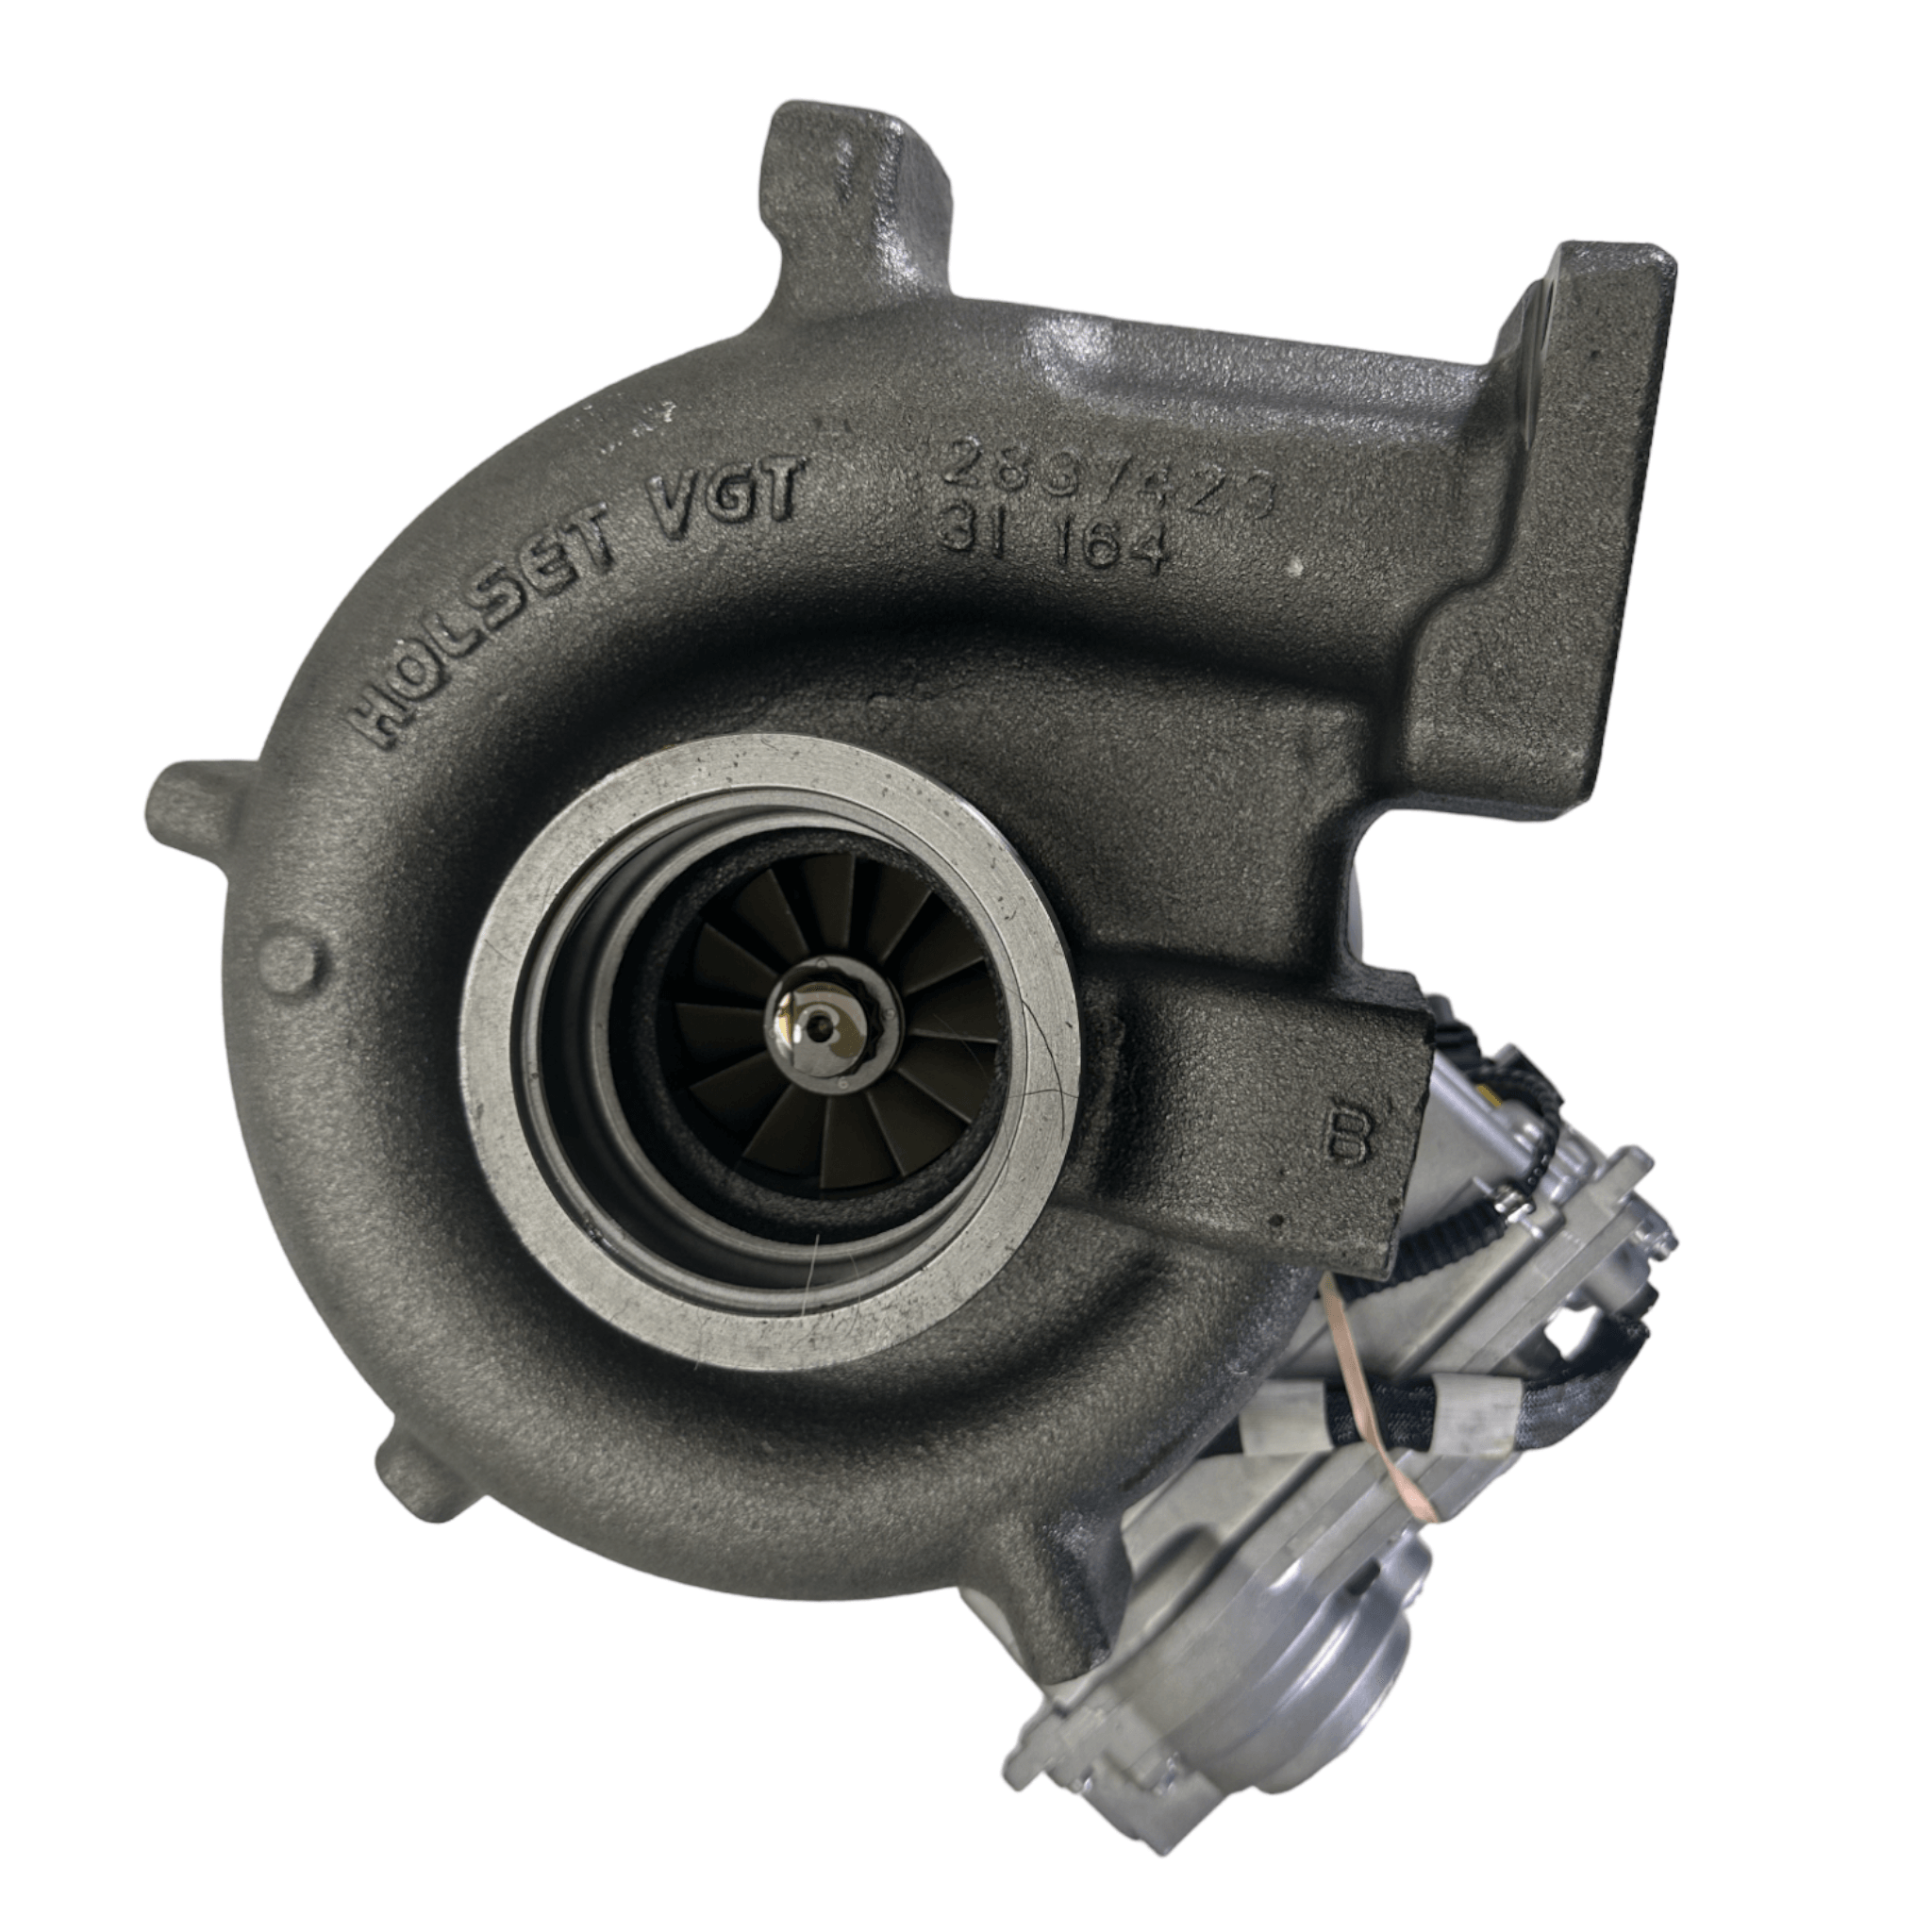 2117933 Genuine Paccar® Mx 13 Epa 10 Holset Turbocharger With Actuator - ADVANCED TRUCK PARTS